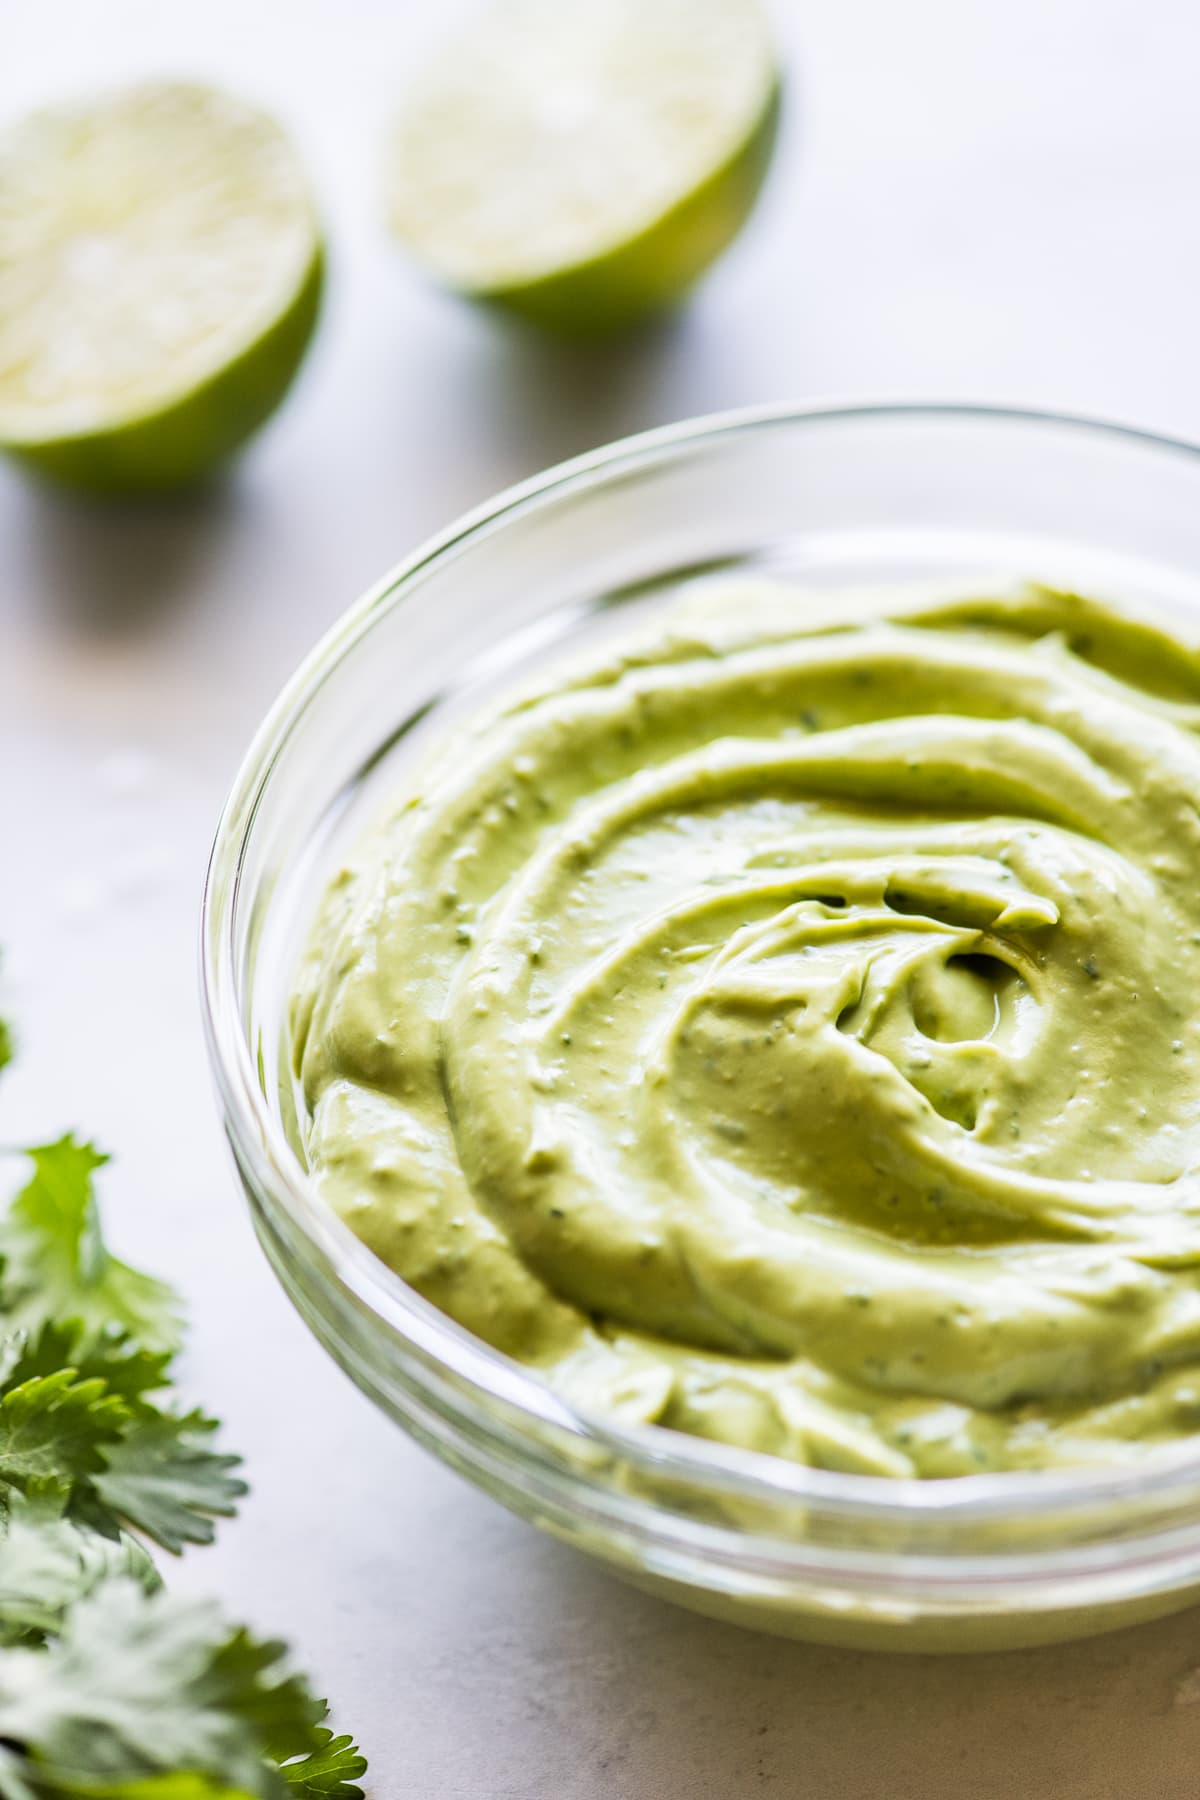 Creamy avocado crema in a clear bowl ready to eat.